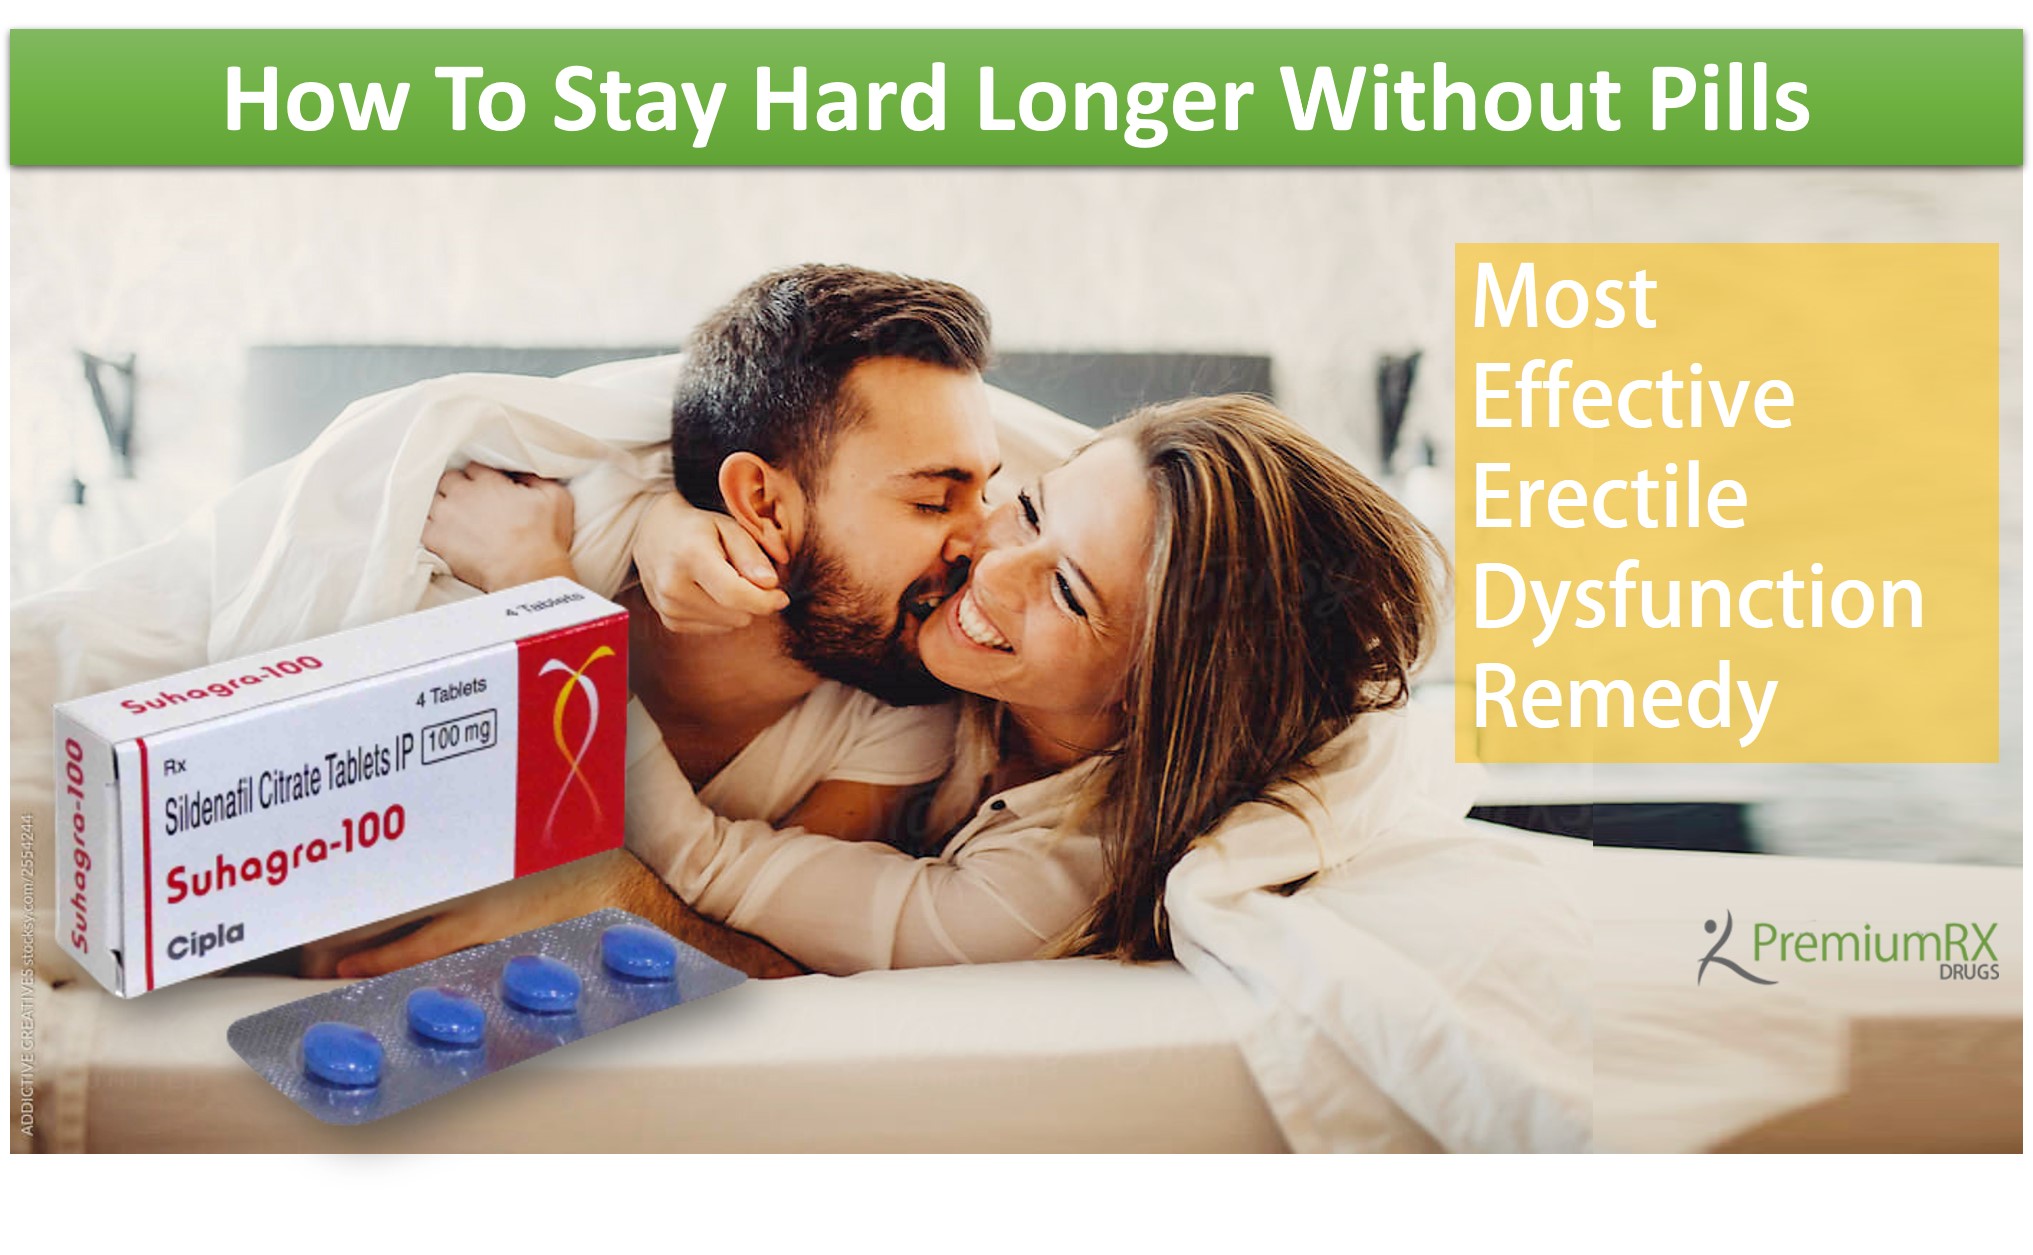 How To Stay Hard Longer Without Pills